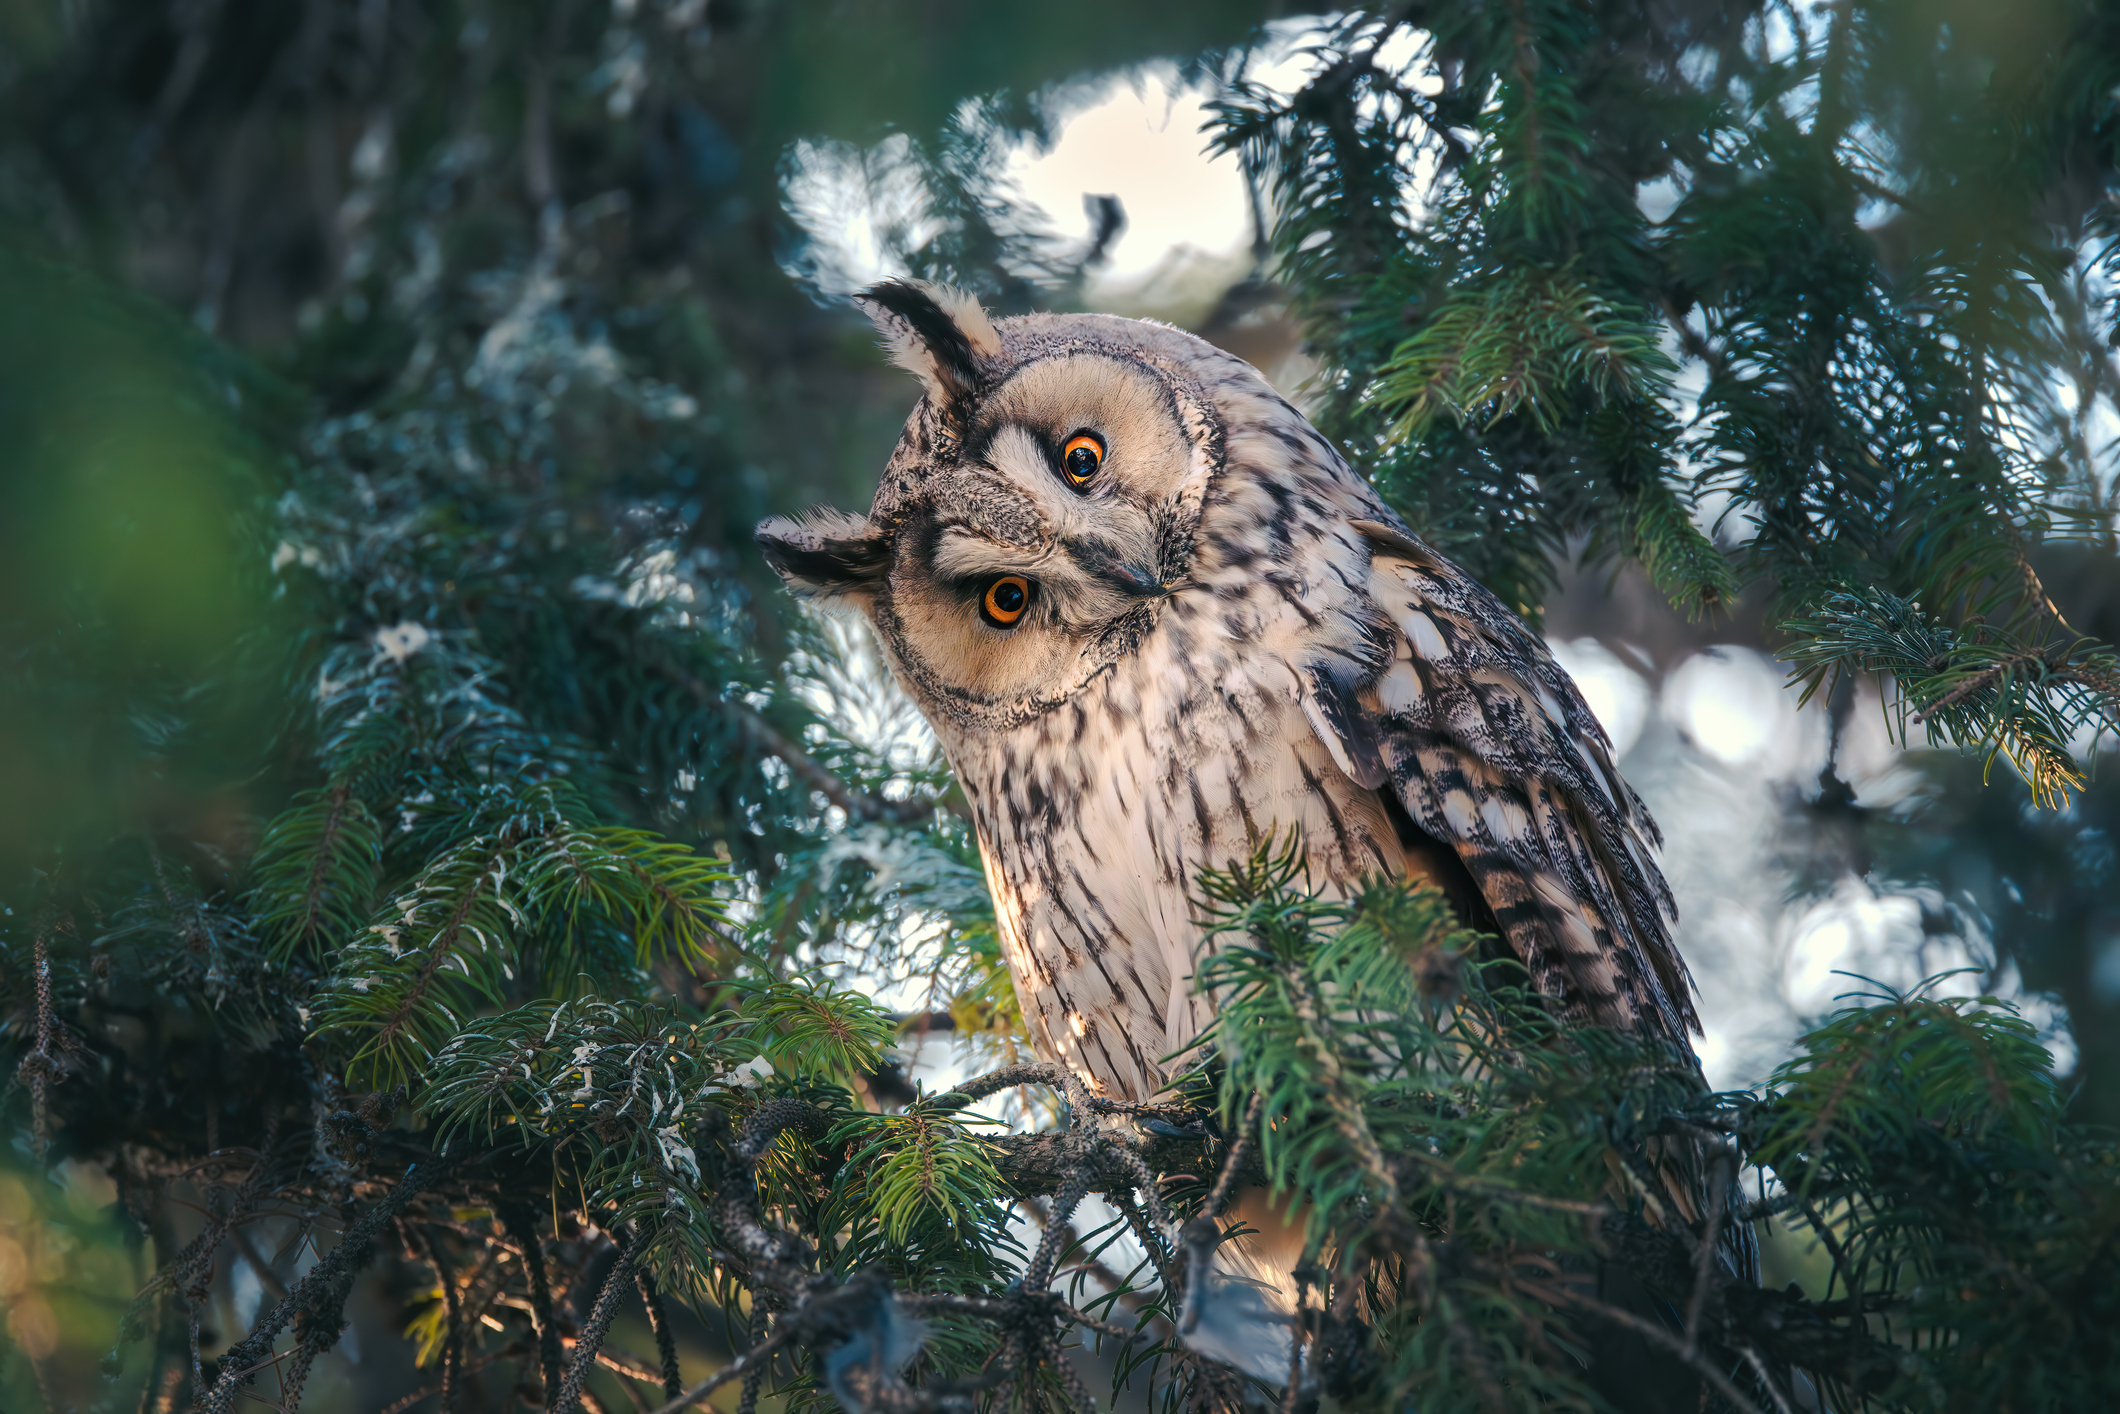 Long-eared owl watching from a pine tree branch in a mystery wood